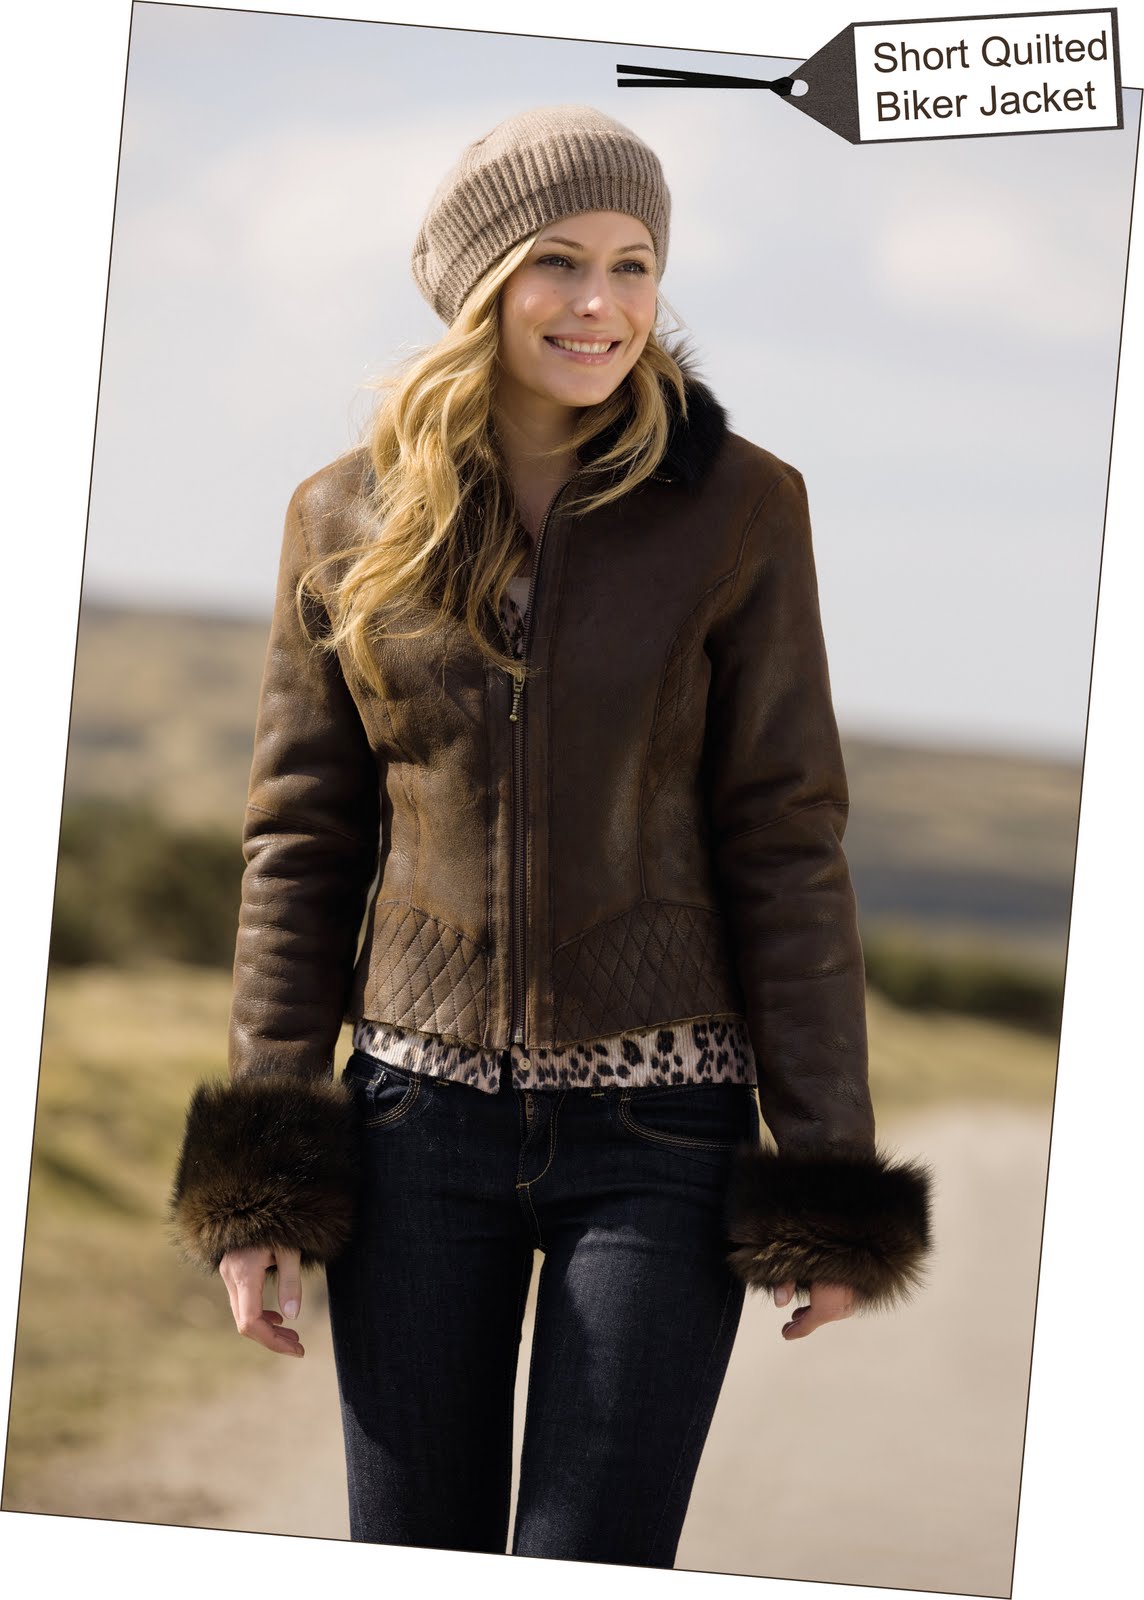 Celtic Sheepskin: Celtic Sheepskin on the new trends… and up first is ...